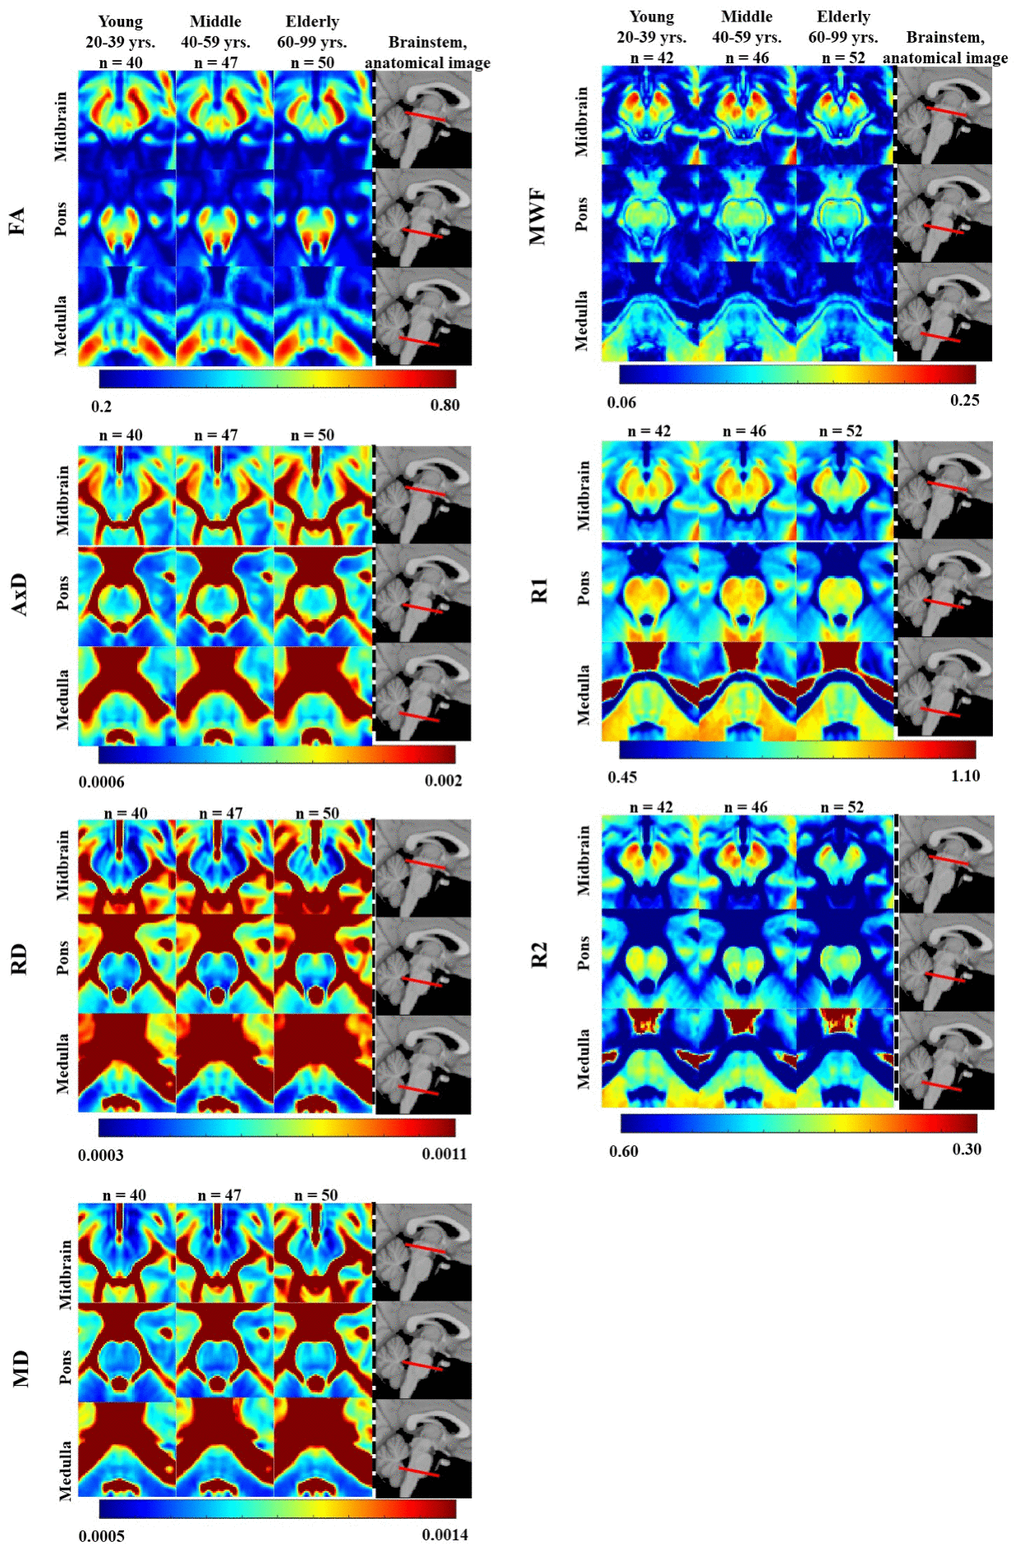 FA, AxD, RD, MD, MWF, R1, and R2 represented as averaged participant maps calculated for three age groups. Three representative slices covering respectively the midbrain, pons, and medulla are displayed. The red bars on the anatomical images indicate the location of these slices. Visual inspection indicates an increase in R1, R2, and MWF from early adulthood, 20-29 years, through middle age, followed by a decrease in several brainstem substructures, and a more generally monotonic decrease in FA. Inspection of AxD, RD, and MD demonstrated a slight decrease from early adulthood through middle age followed by an increase in several brainstem substructures.